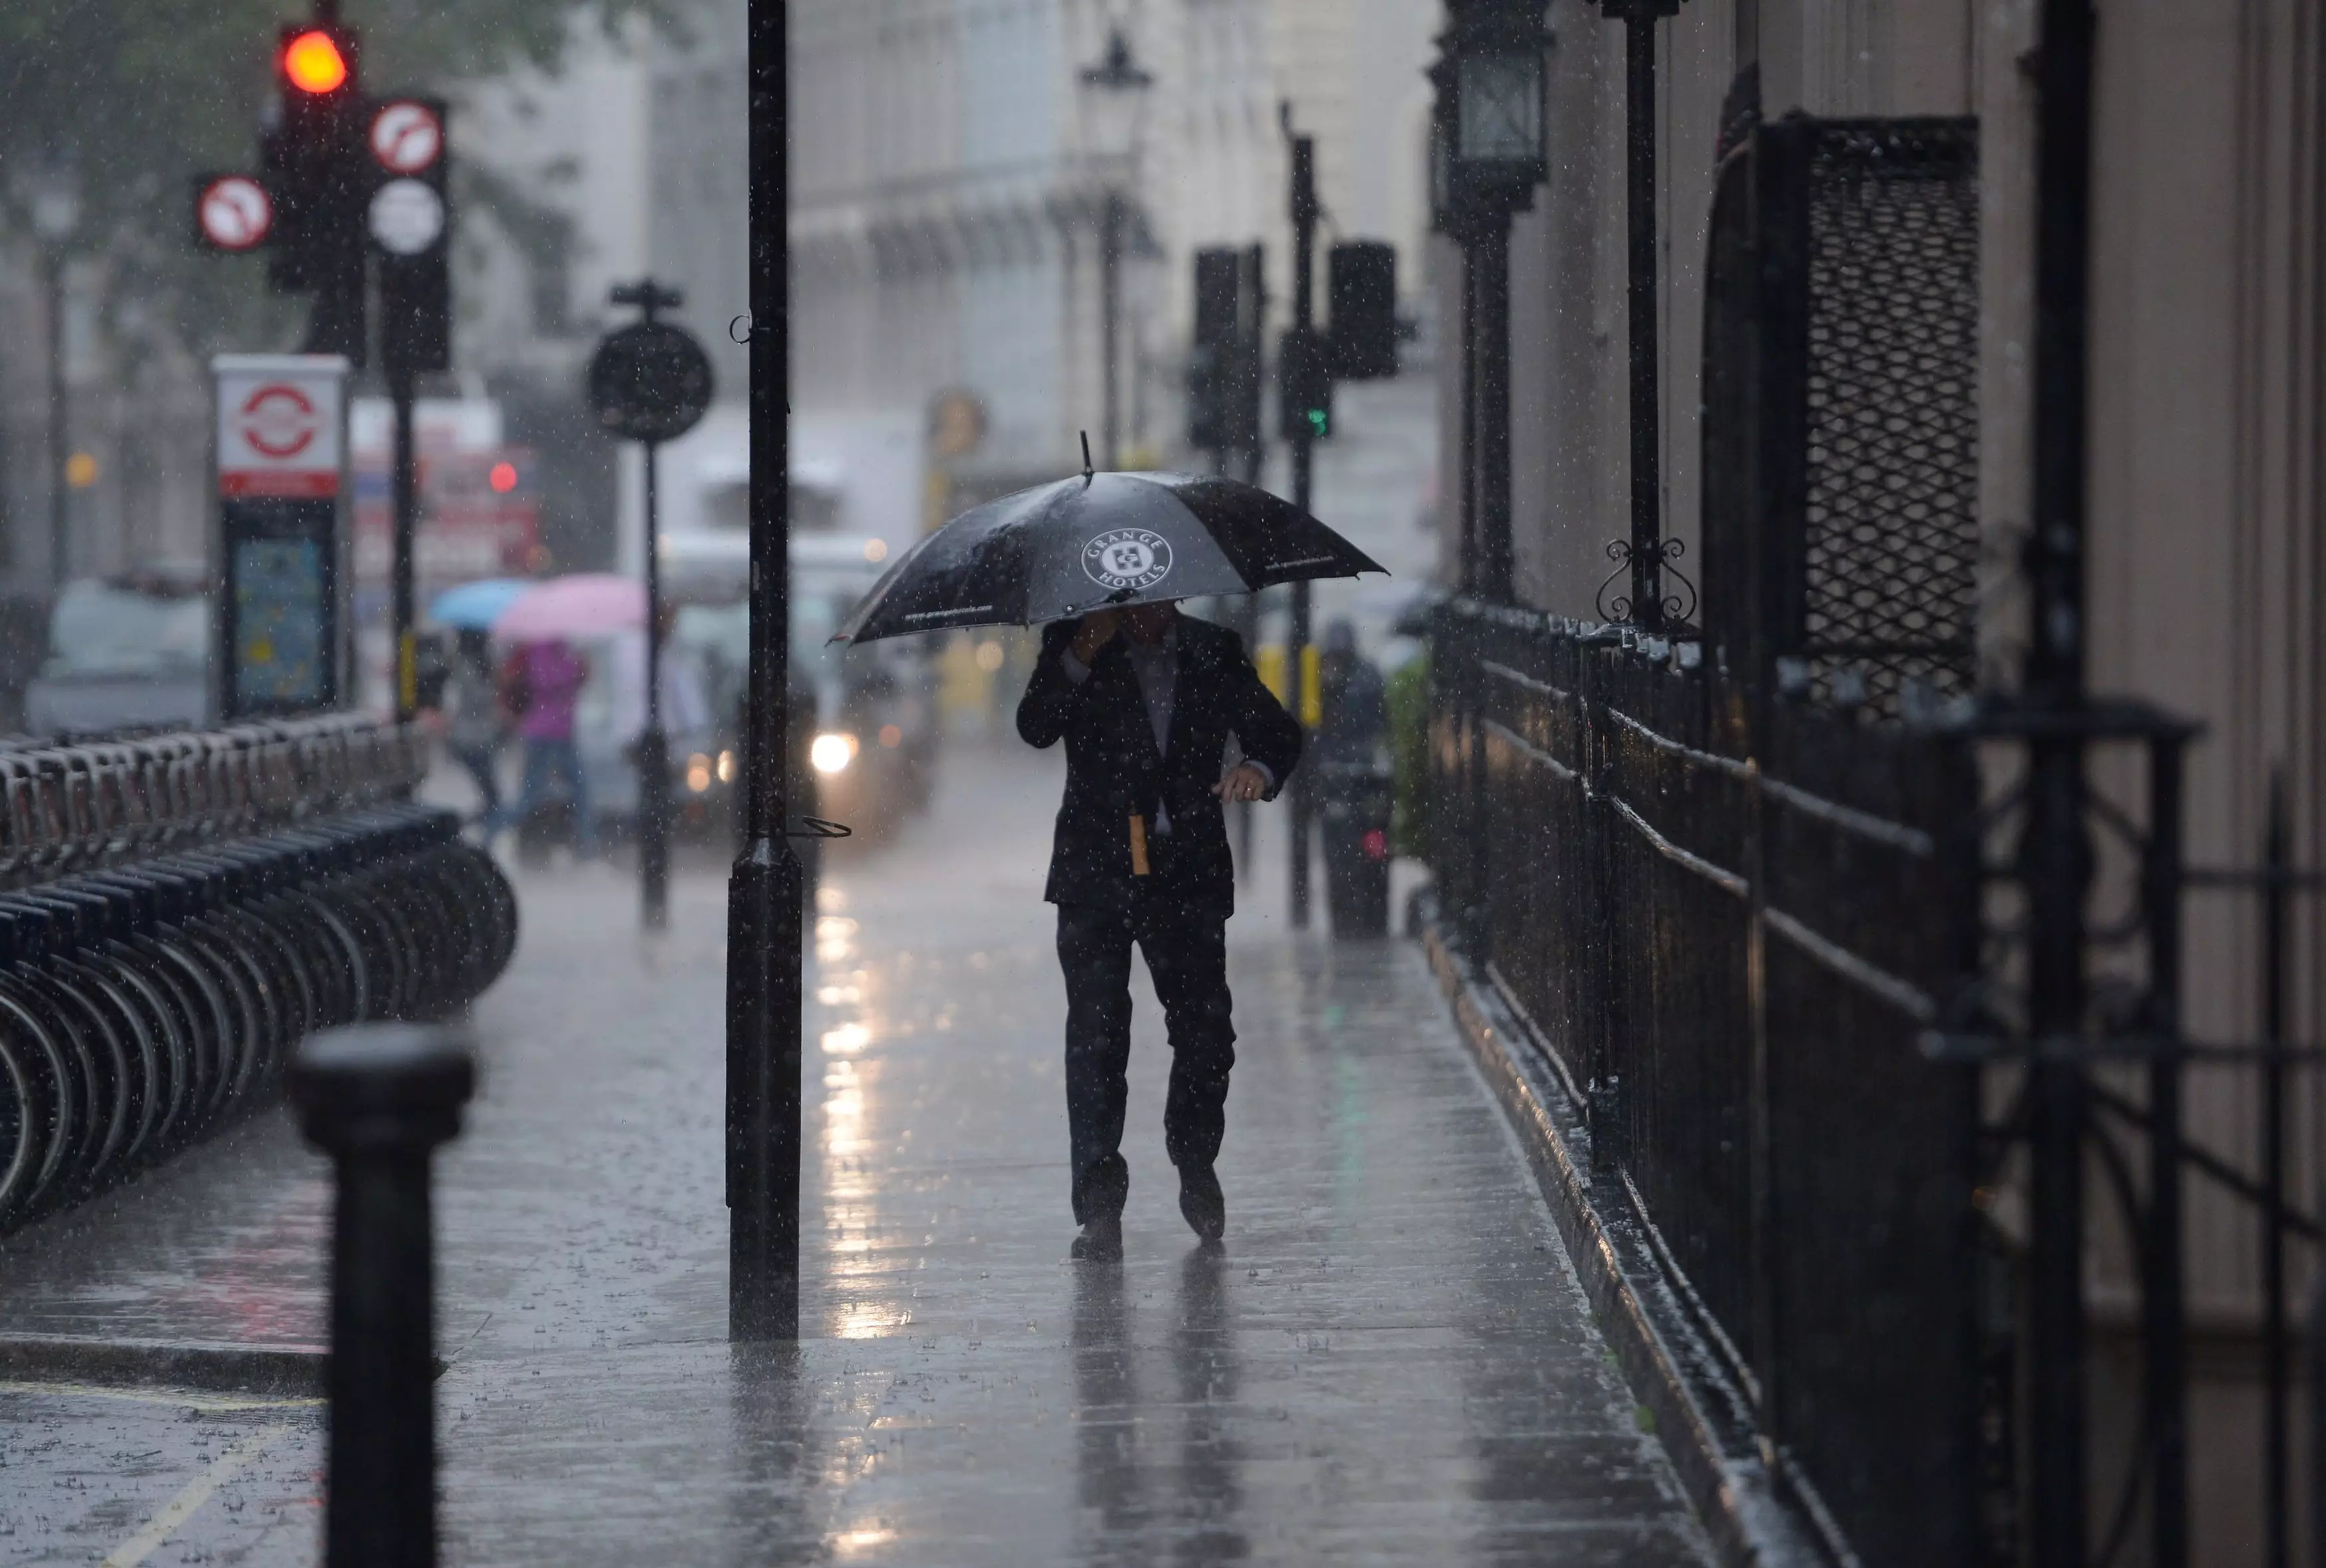 The Met Office as warned of the potential risk of heavy rain and flooding this weekend.